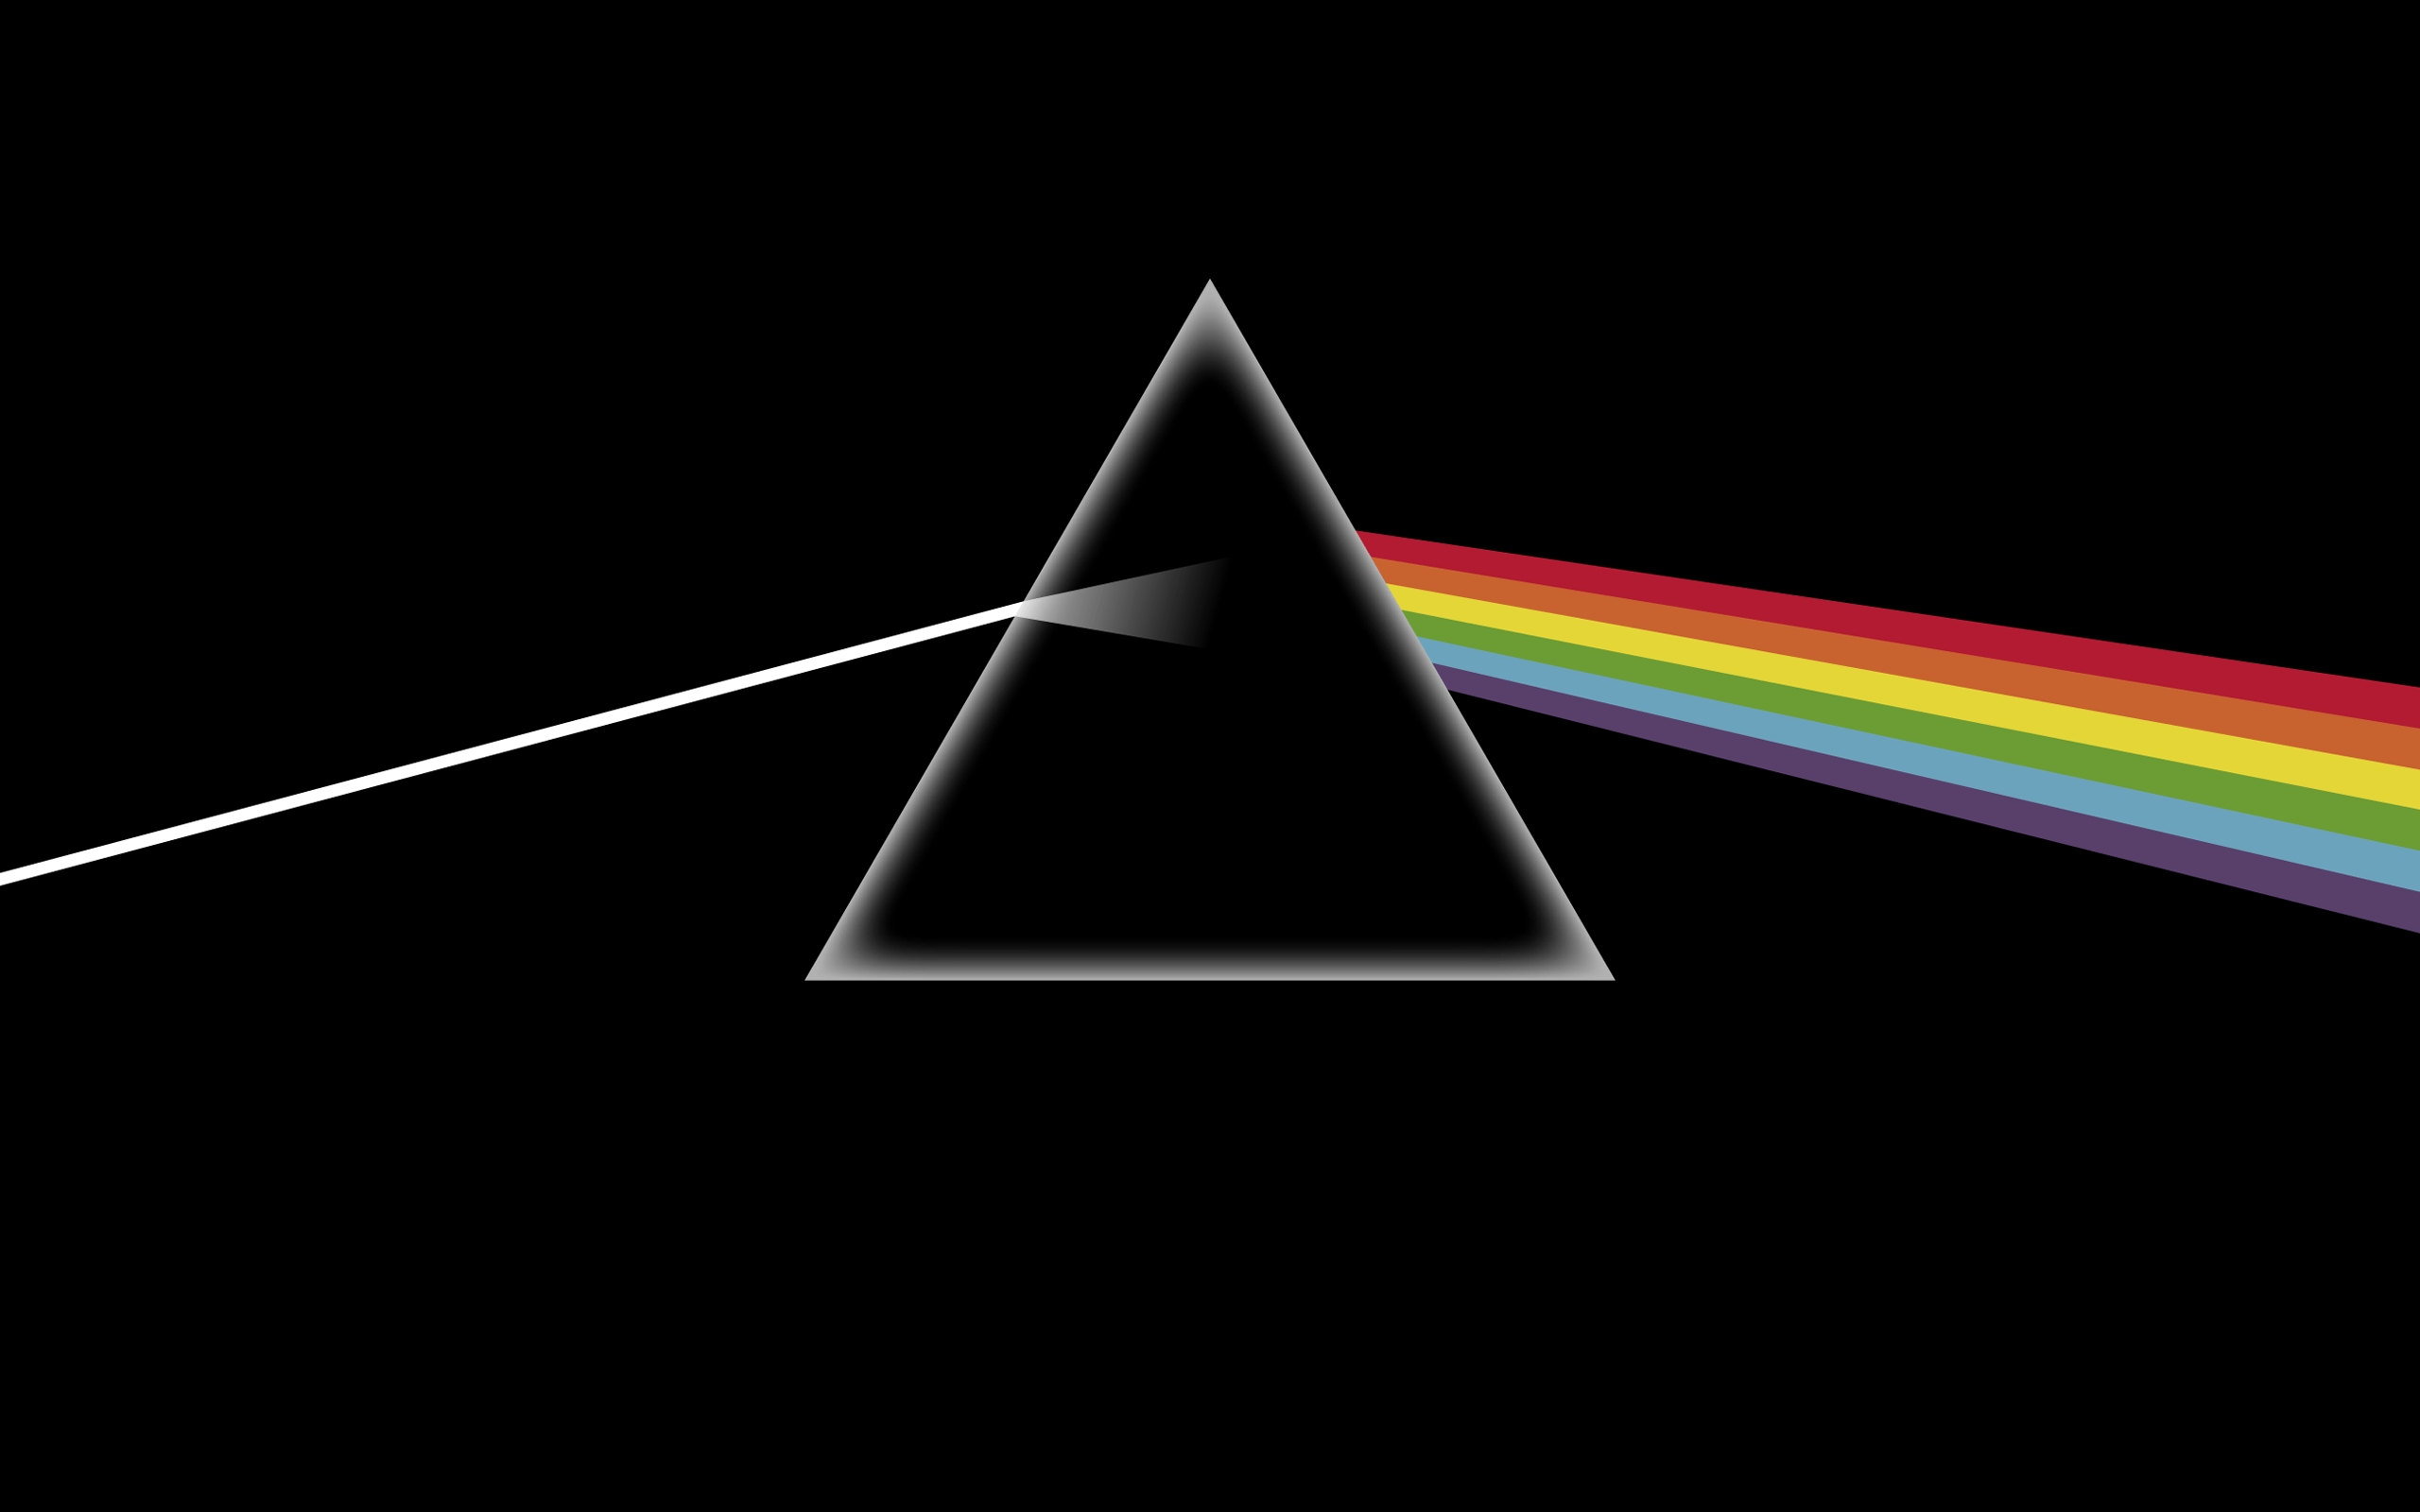 10 Most Popular Dark Side Of The Moon Wallpaper FULL HD 1080p For PC Background